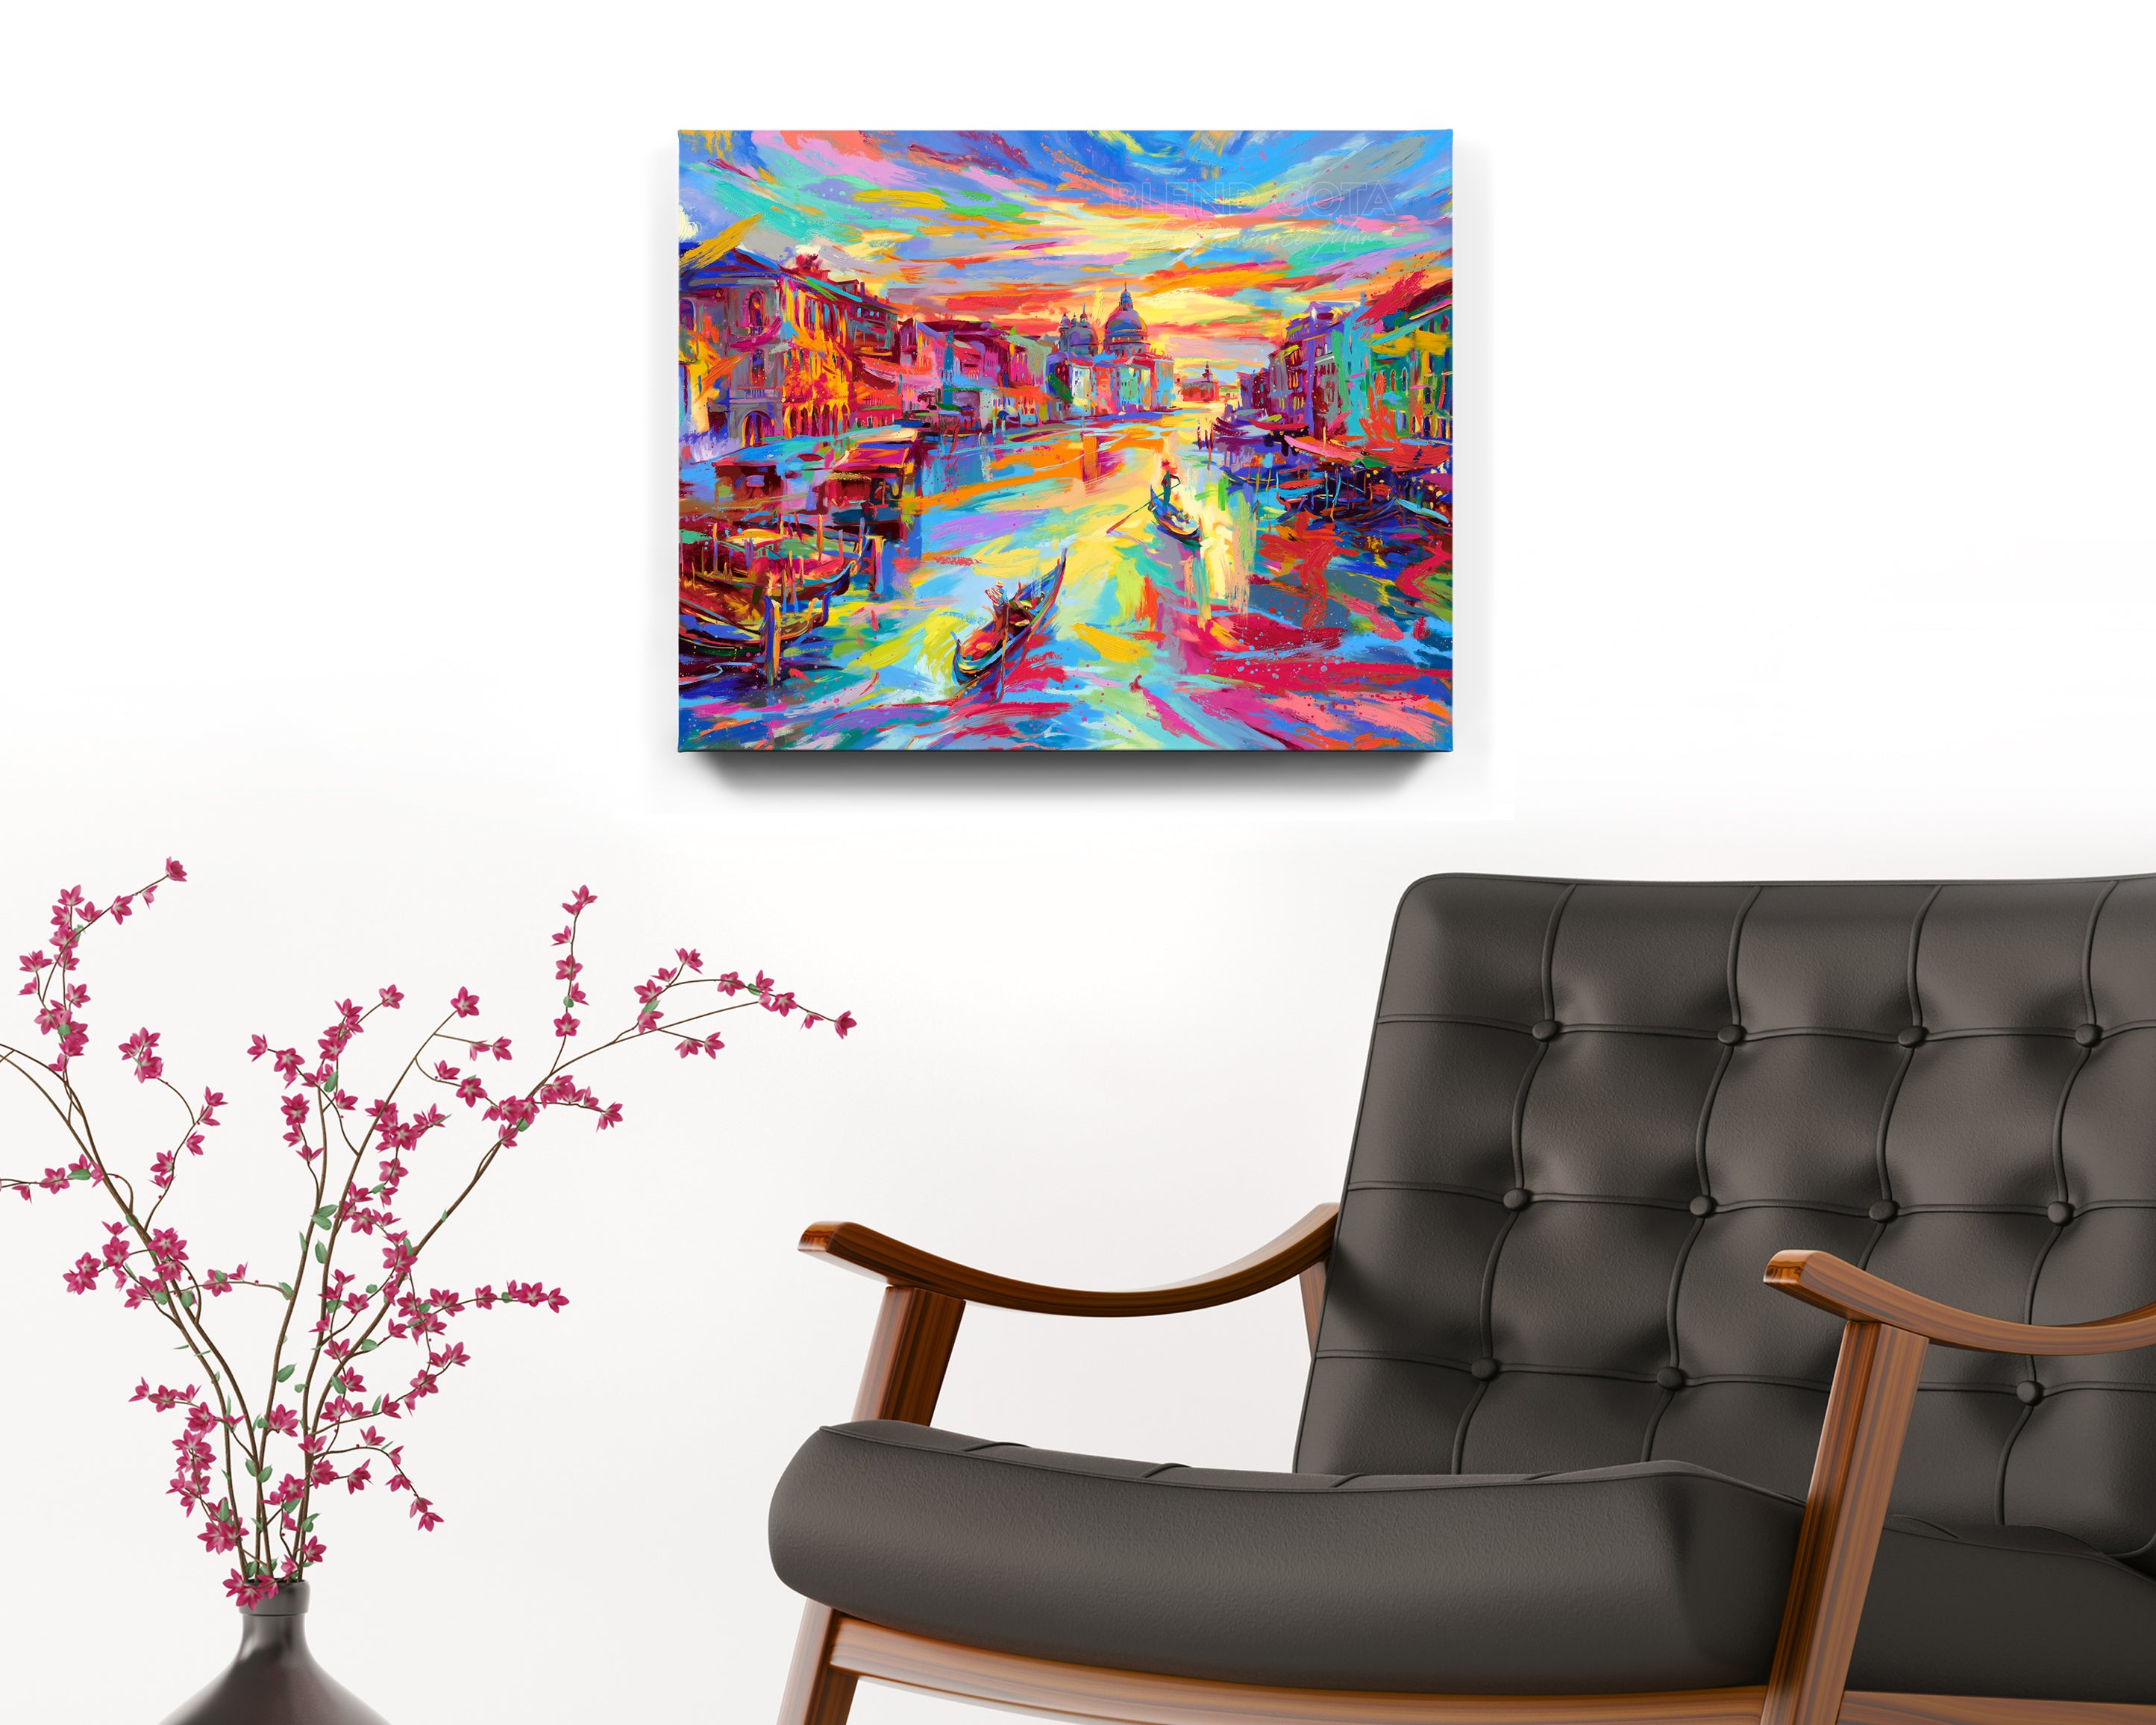 Venice color painting - The City of Water painted by Blend Cota Art Print framed on Canvas from Blend Cota Studios with painting hanging on white wall behind a black leather armchair